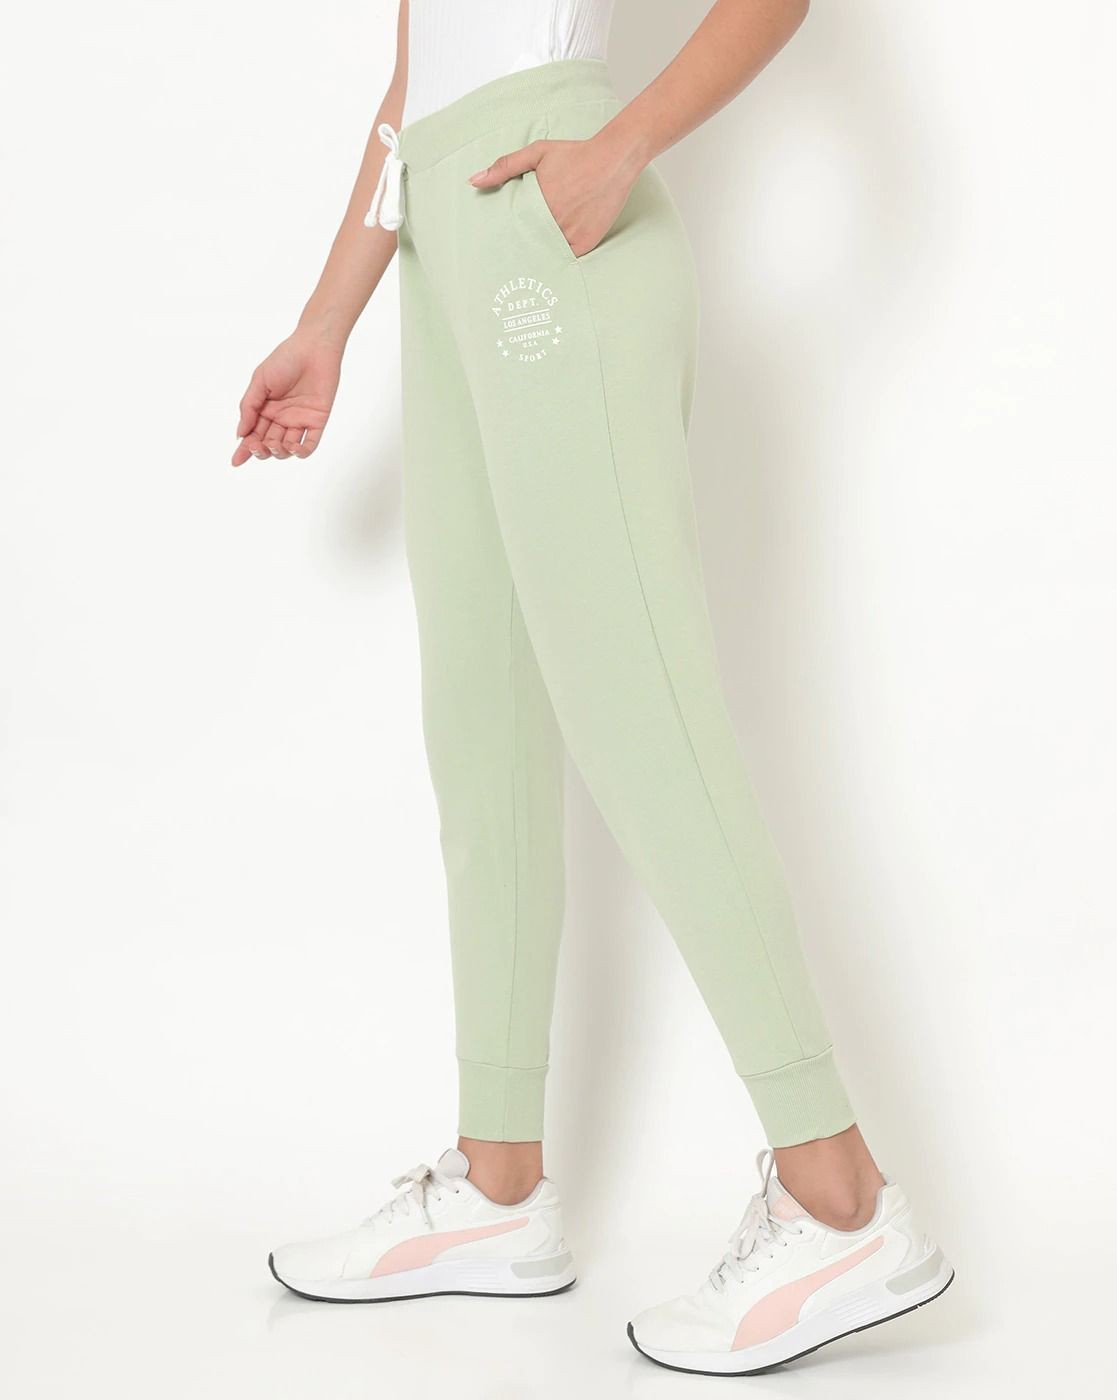 The model in the image is wearing Amazing Joggers For Womens Pure Cotton from Alice Milan. Crafted with the finest materials and impeccable attention to detail, the Joggers looks premium, trendy, luxurious and offers unparalleled comfort. It’s a perfect clothing option for loungewear, resort wear, party wear or for an airport look. The woman in the image looks happy, and confident with her style statement putting a happy smile on her face.